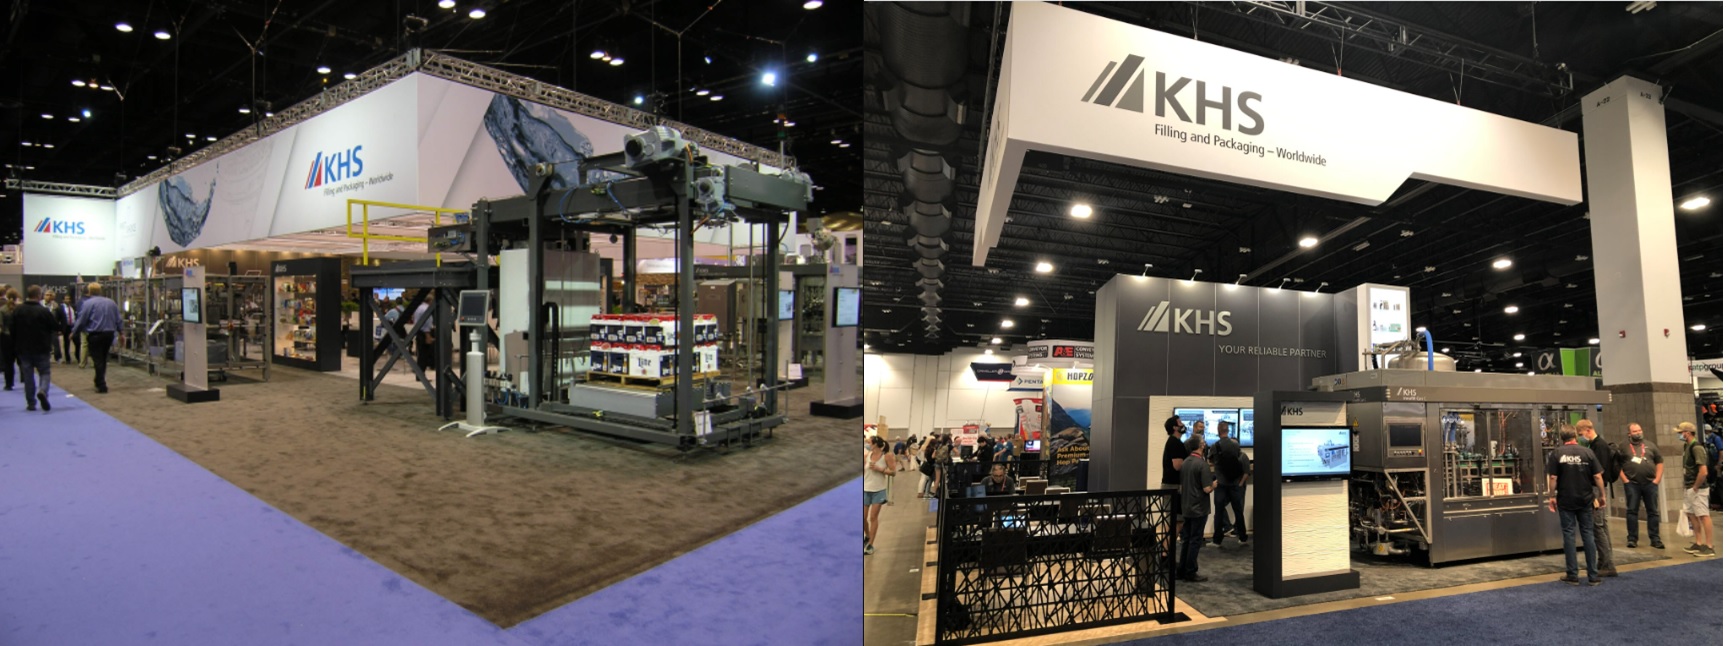 KHS rental trade show exhibits flexibility for multiple sizes